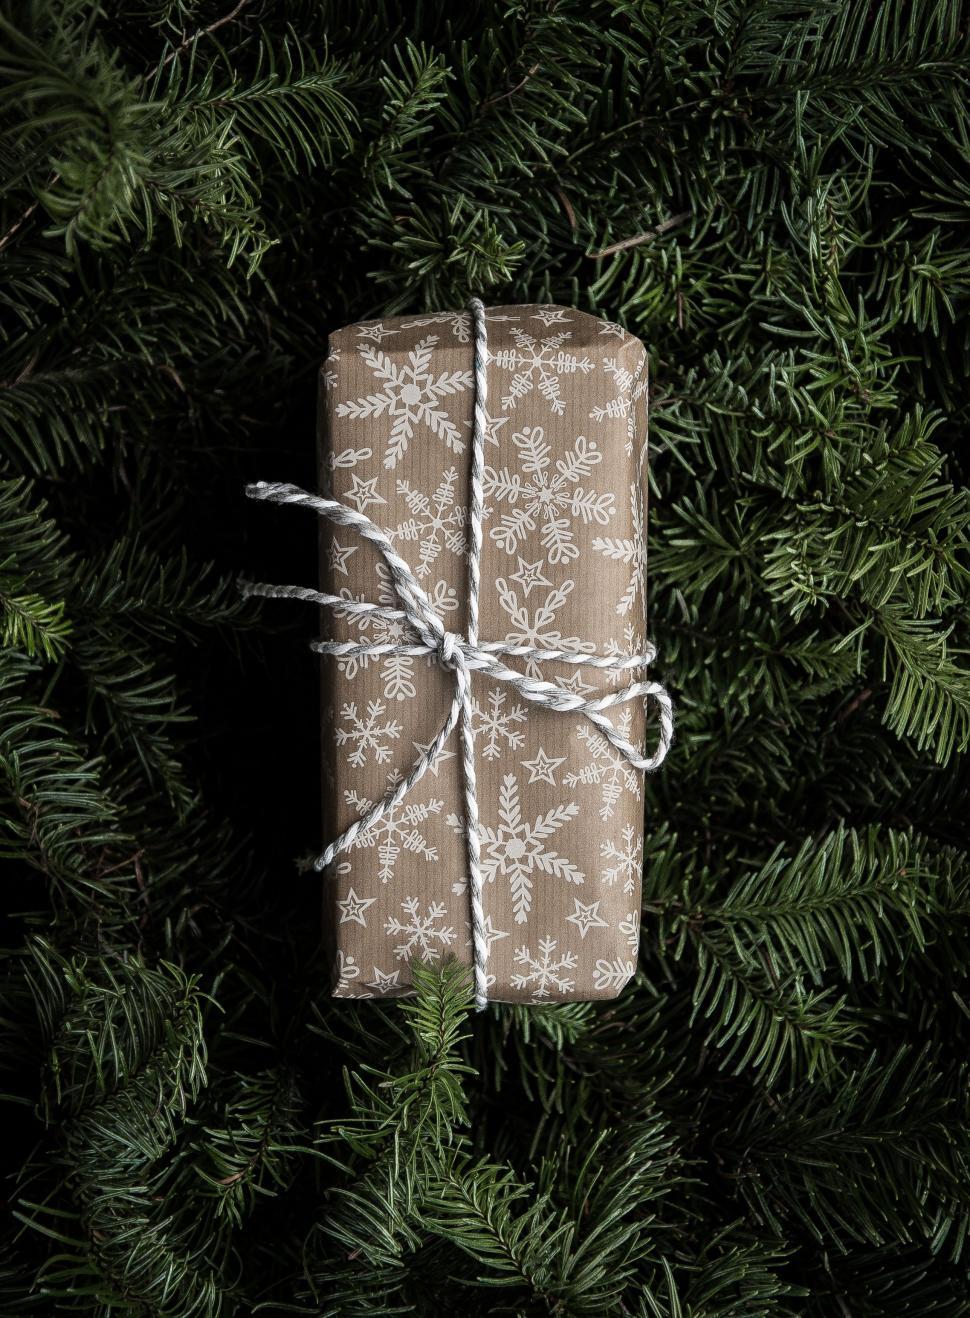 Free Image of Wrapped Present Sitting on Top of a Christmas Tree 